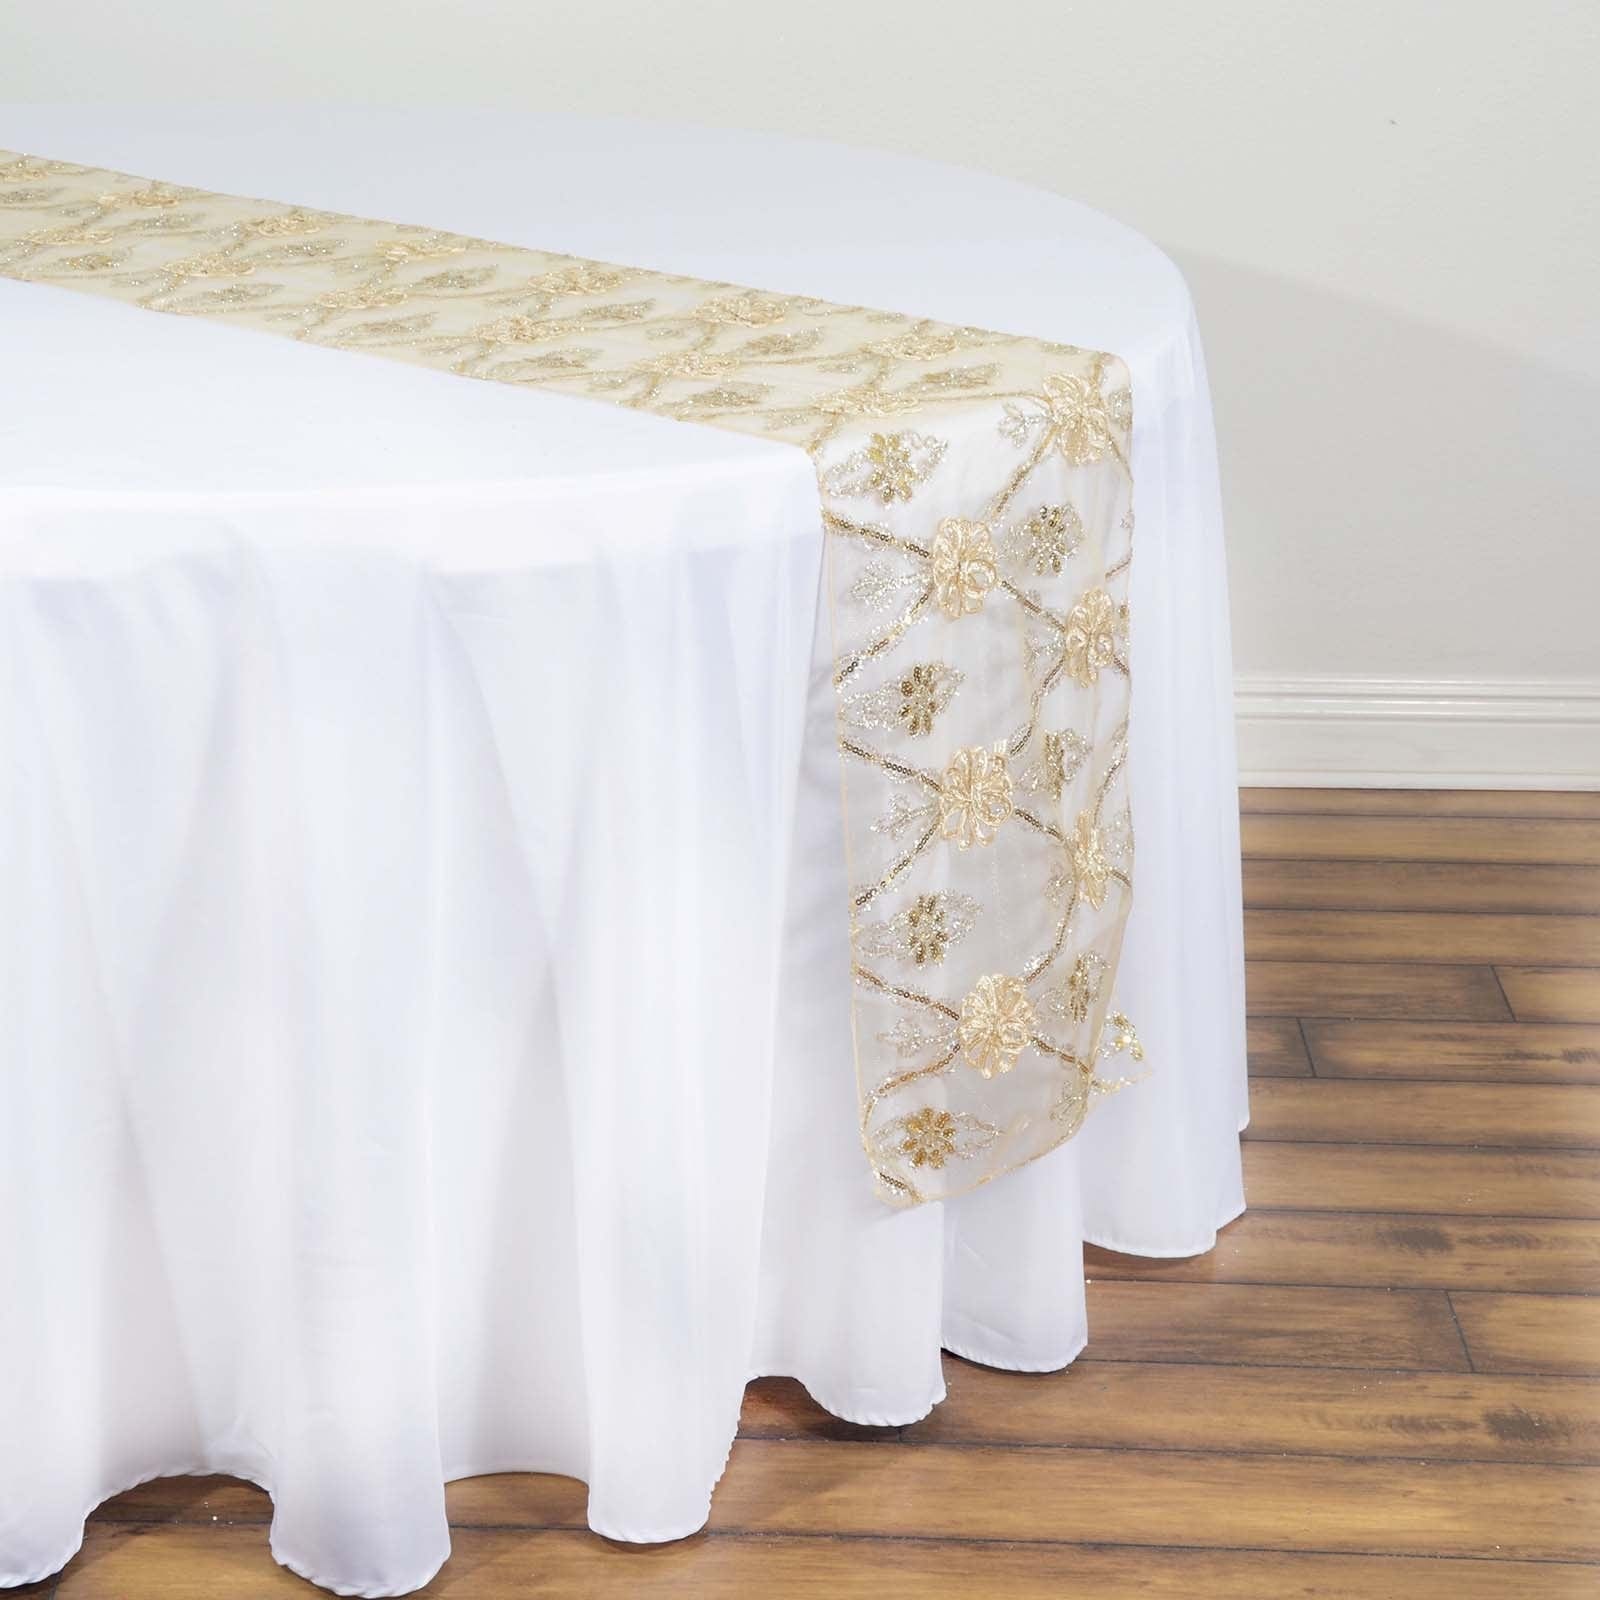 Sequined Flowers on Lace Table Runner